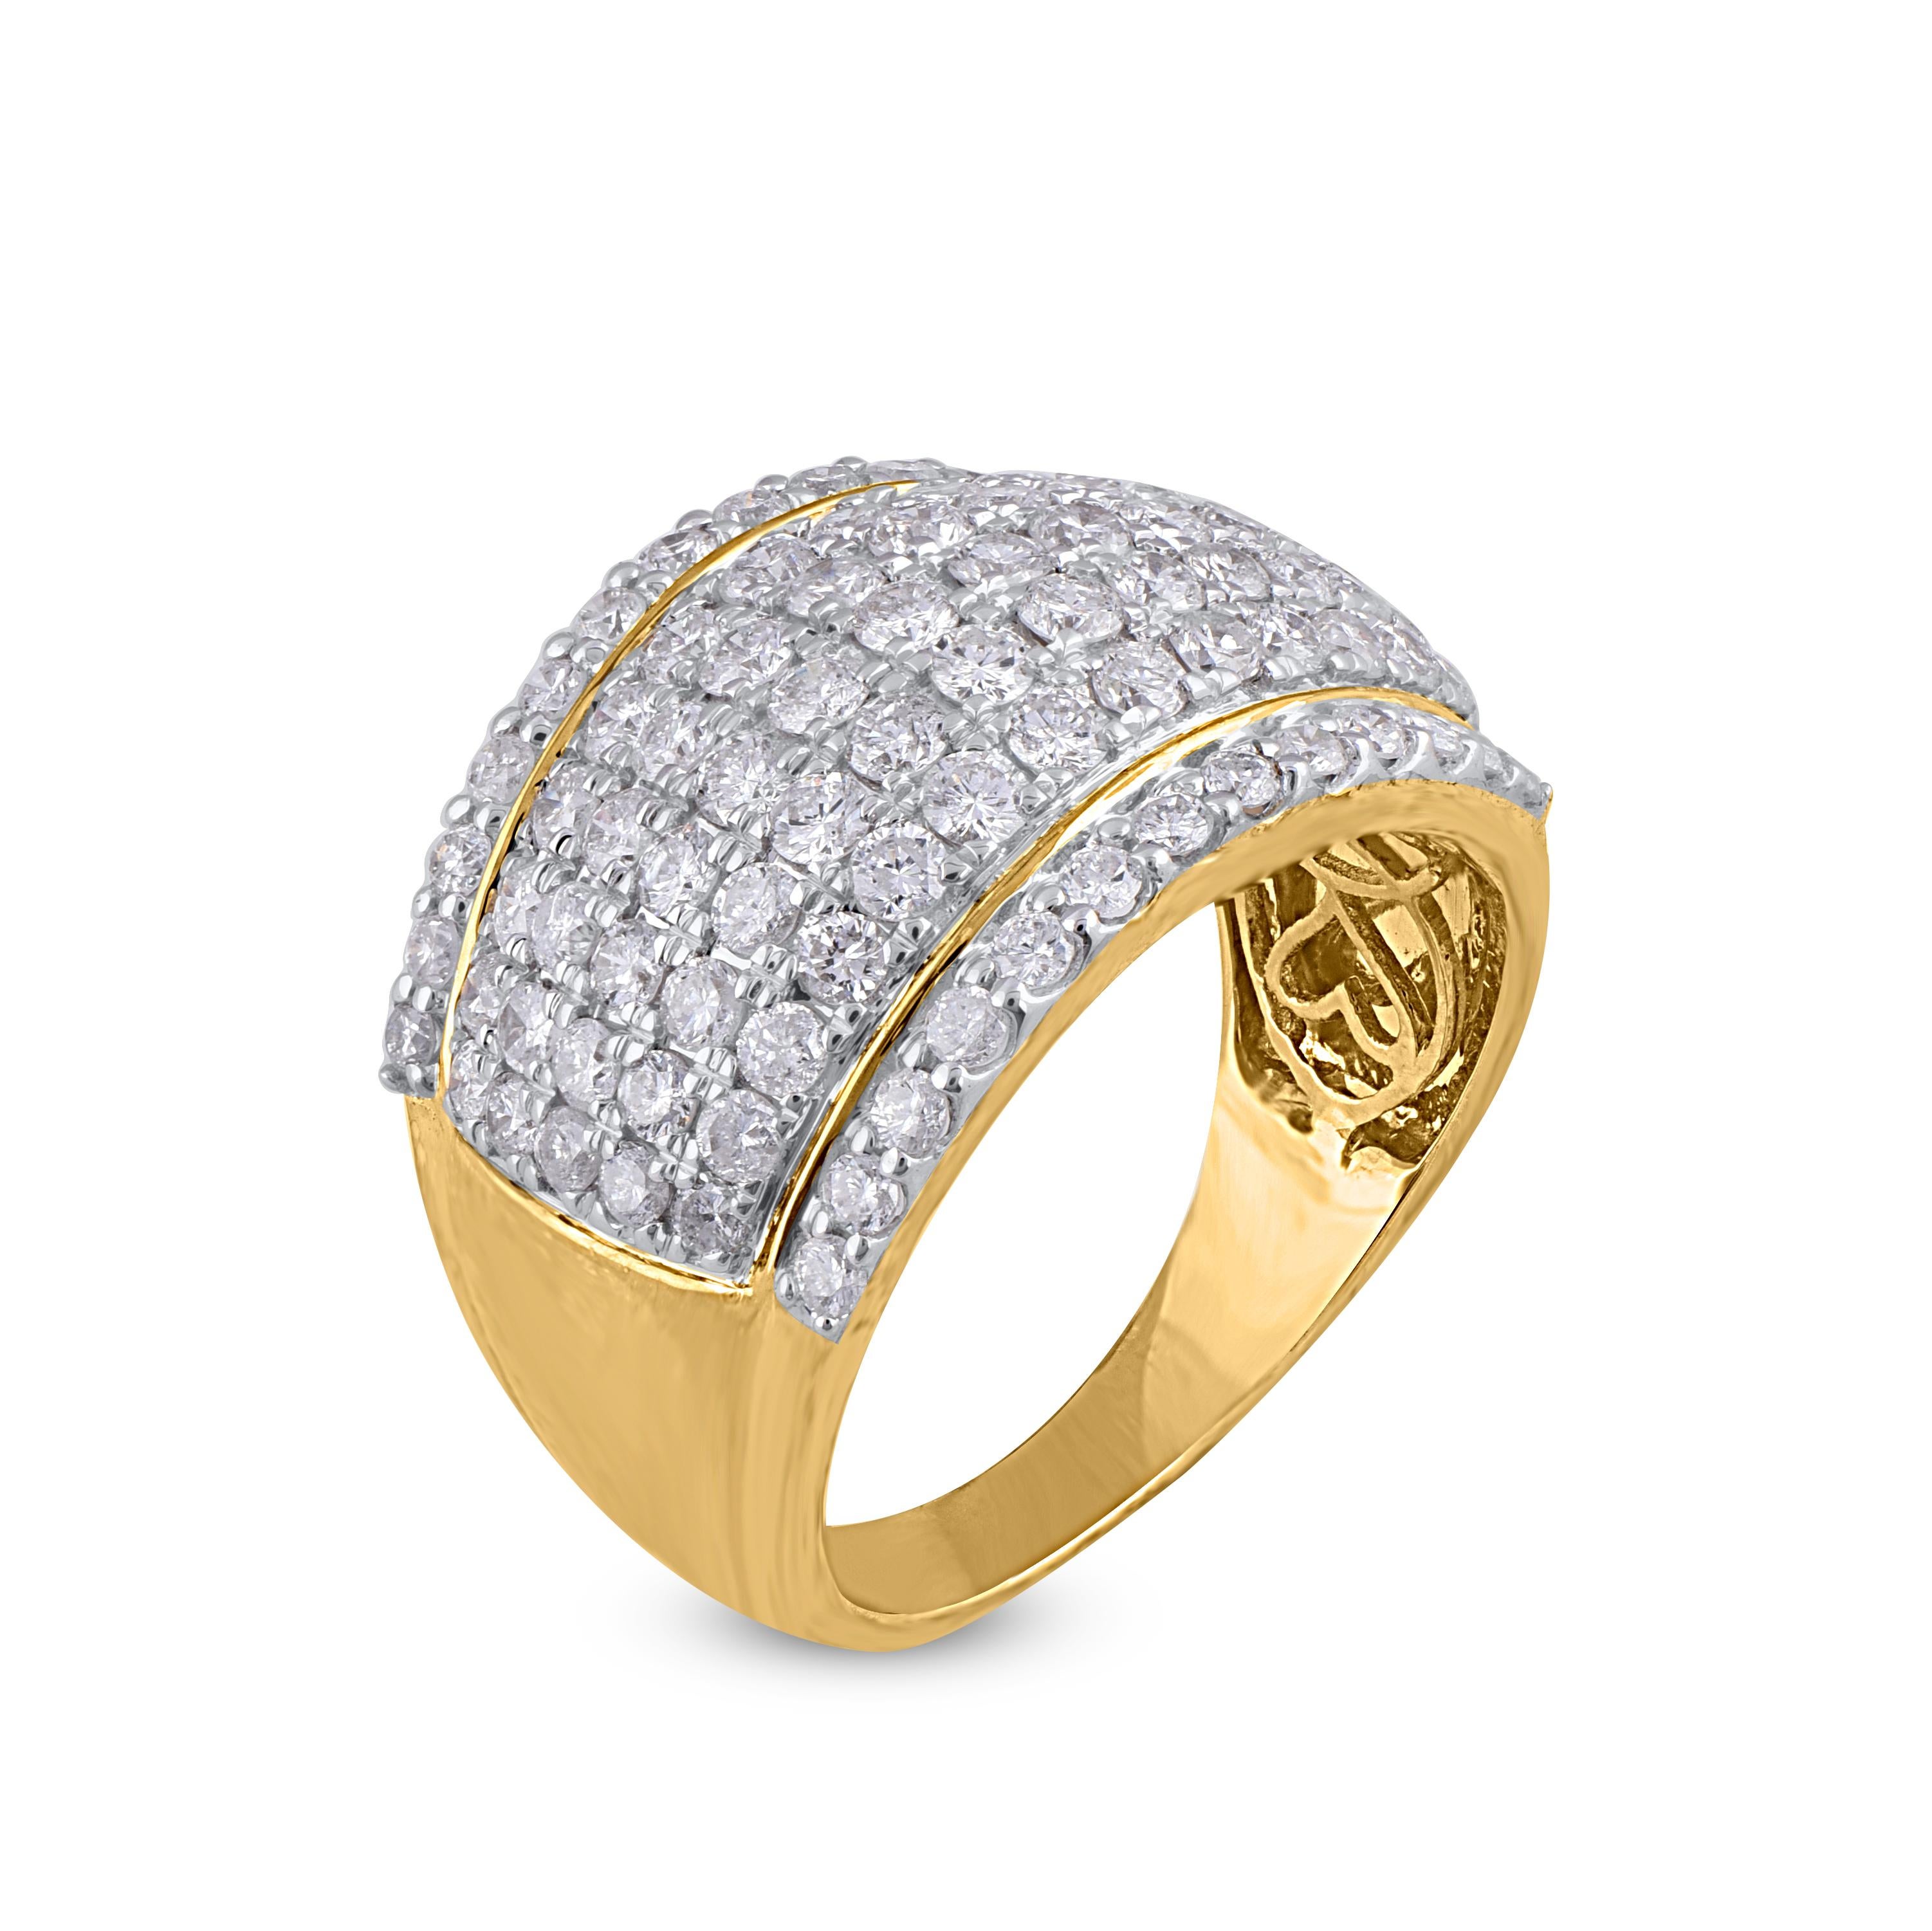 Contemporary TJD 2.0 Carat Brilliant Cut Diamond Anniversary Band Ring in 14KT Yellow Gold For Sale